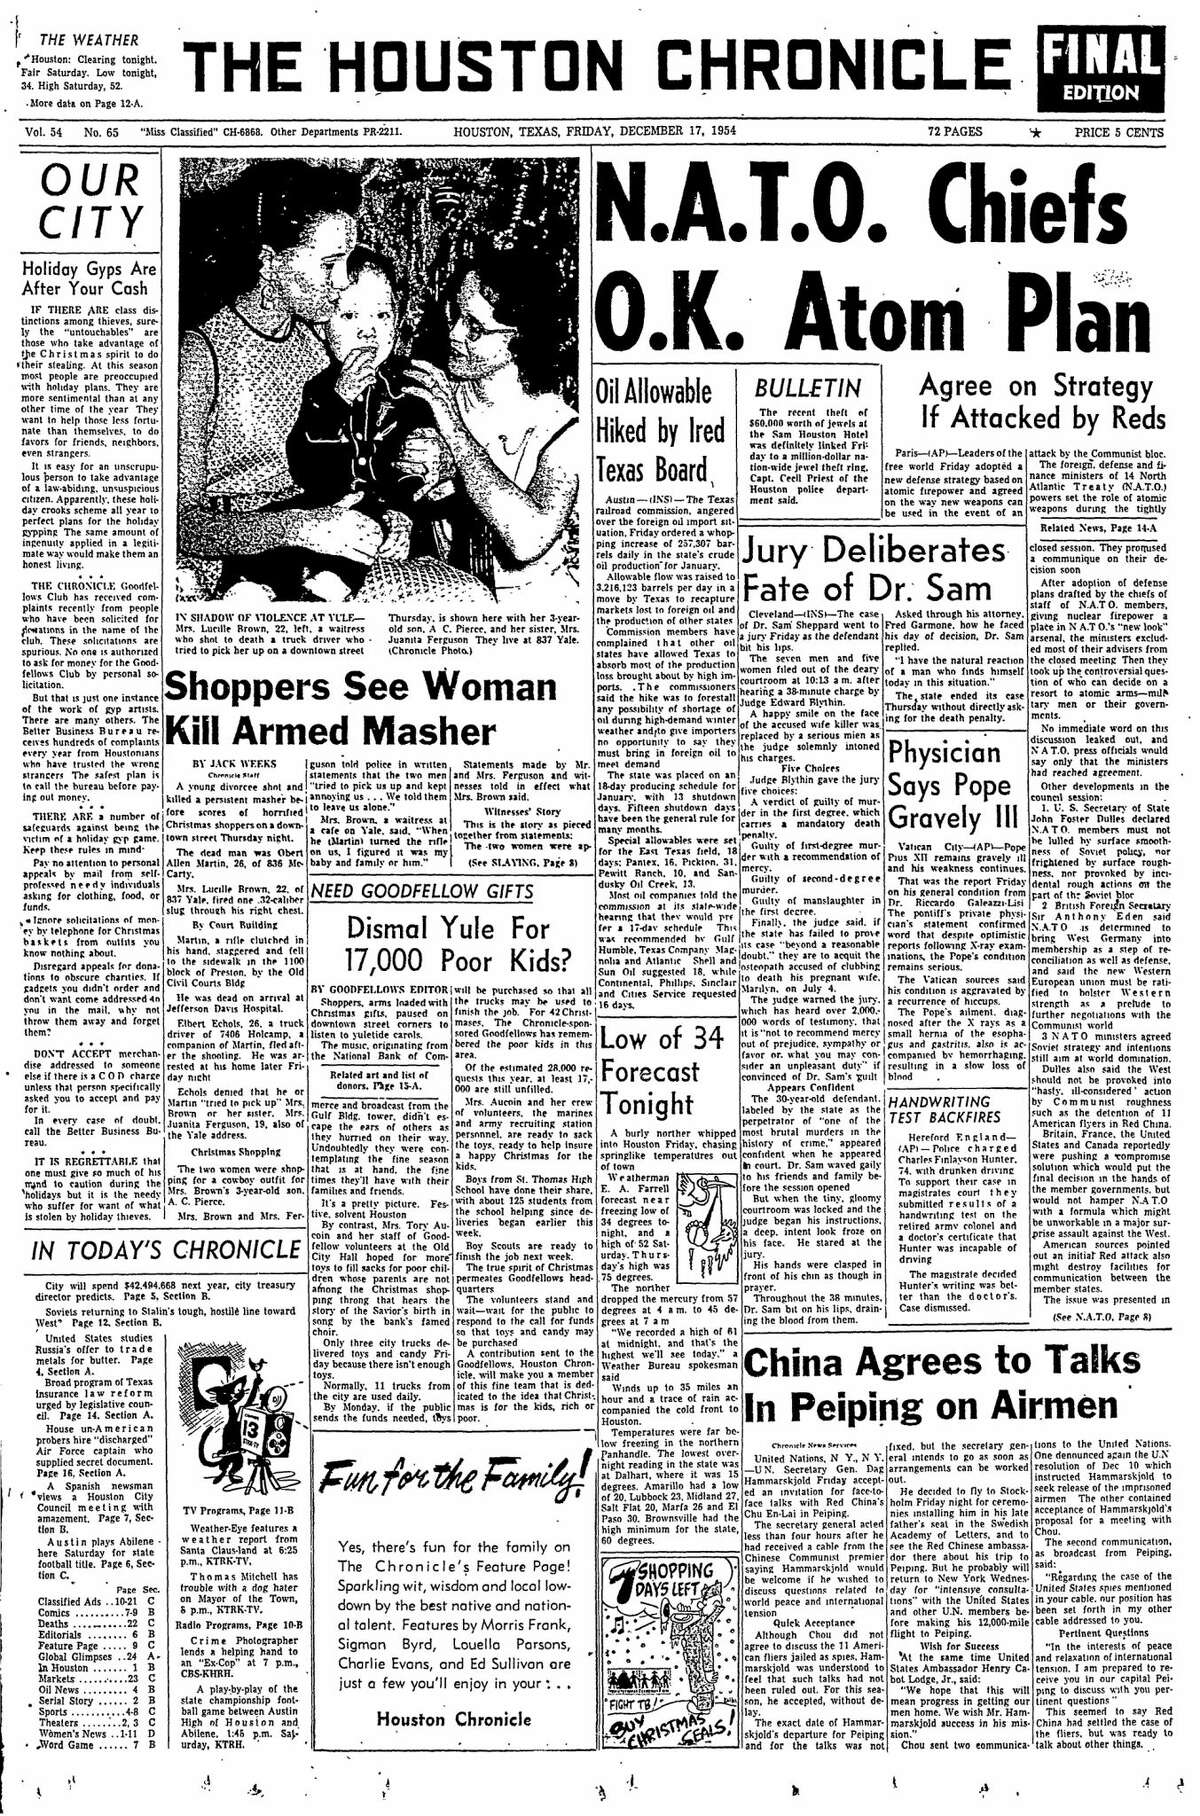 Houston Chronicle front page for Dec. 17, 1954.